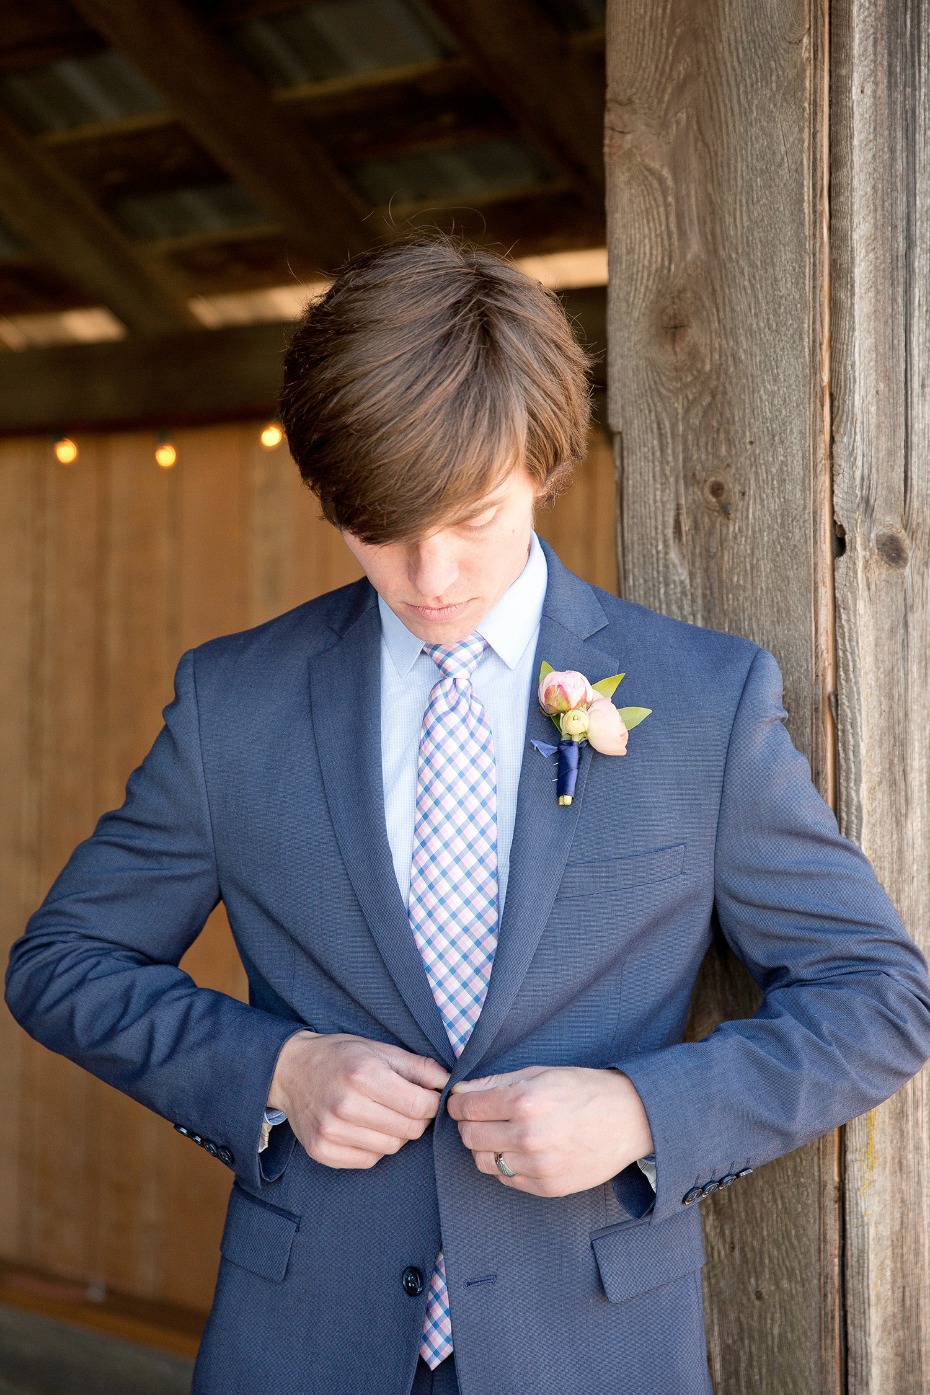 Blue suit for the groom